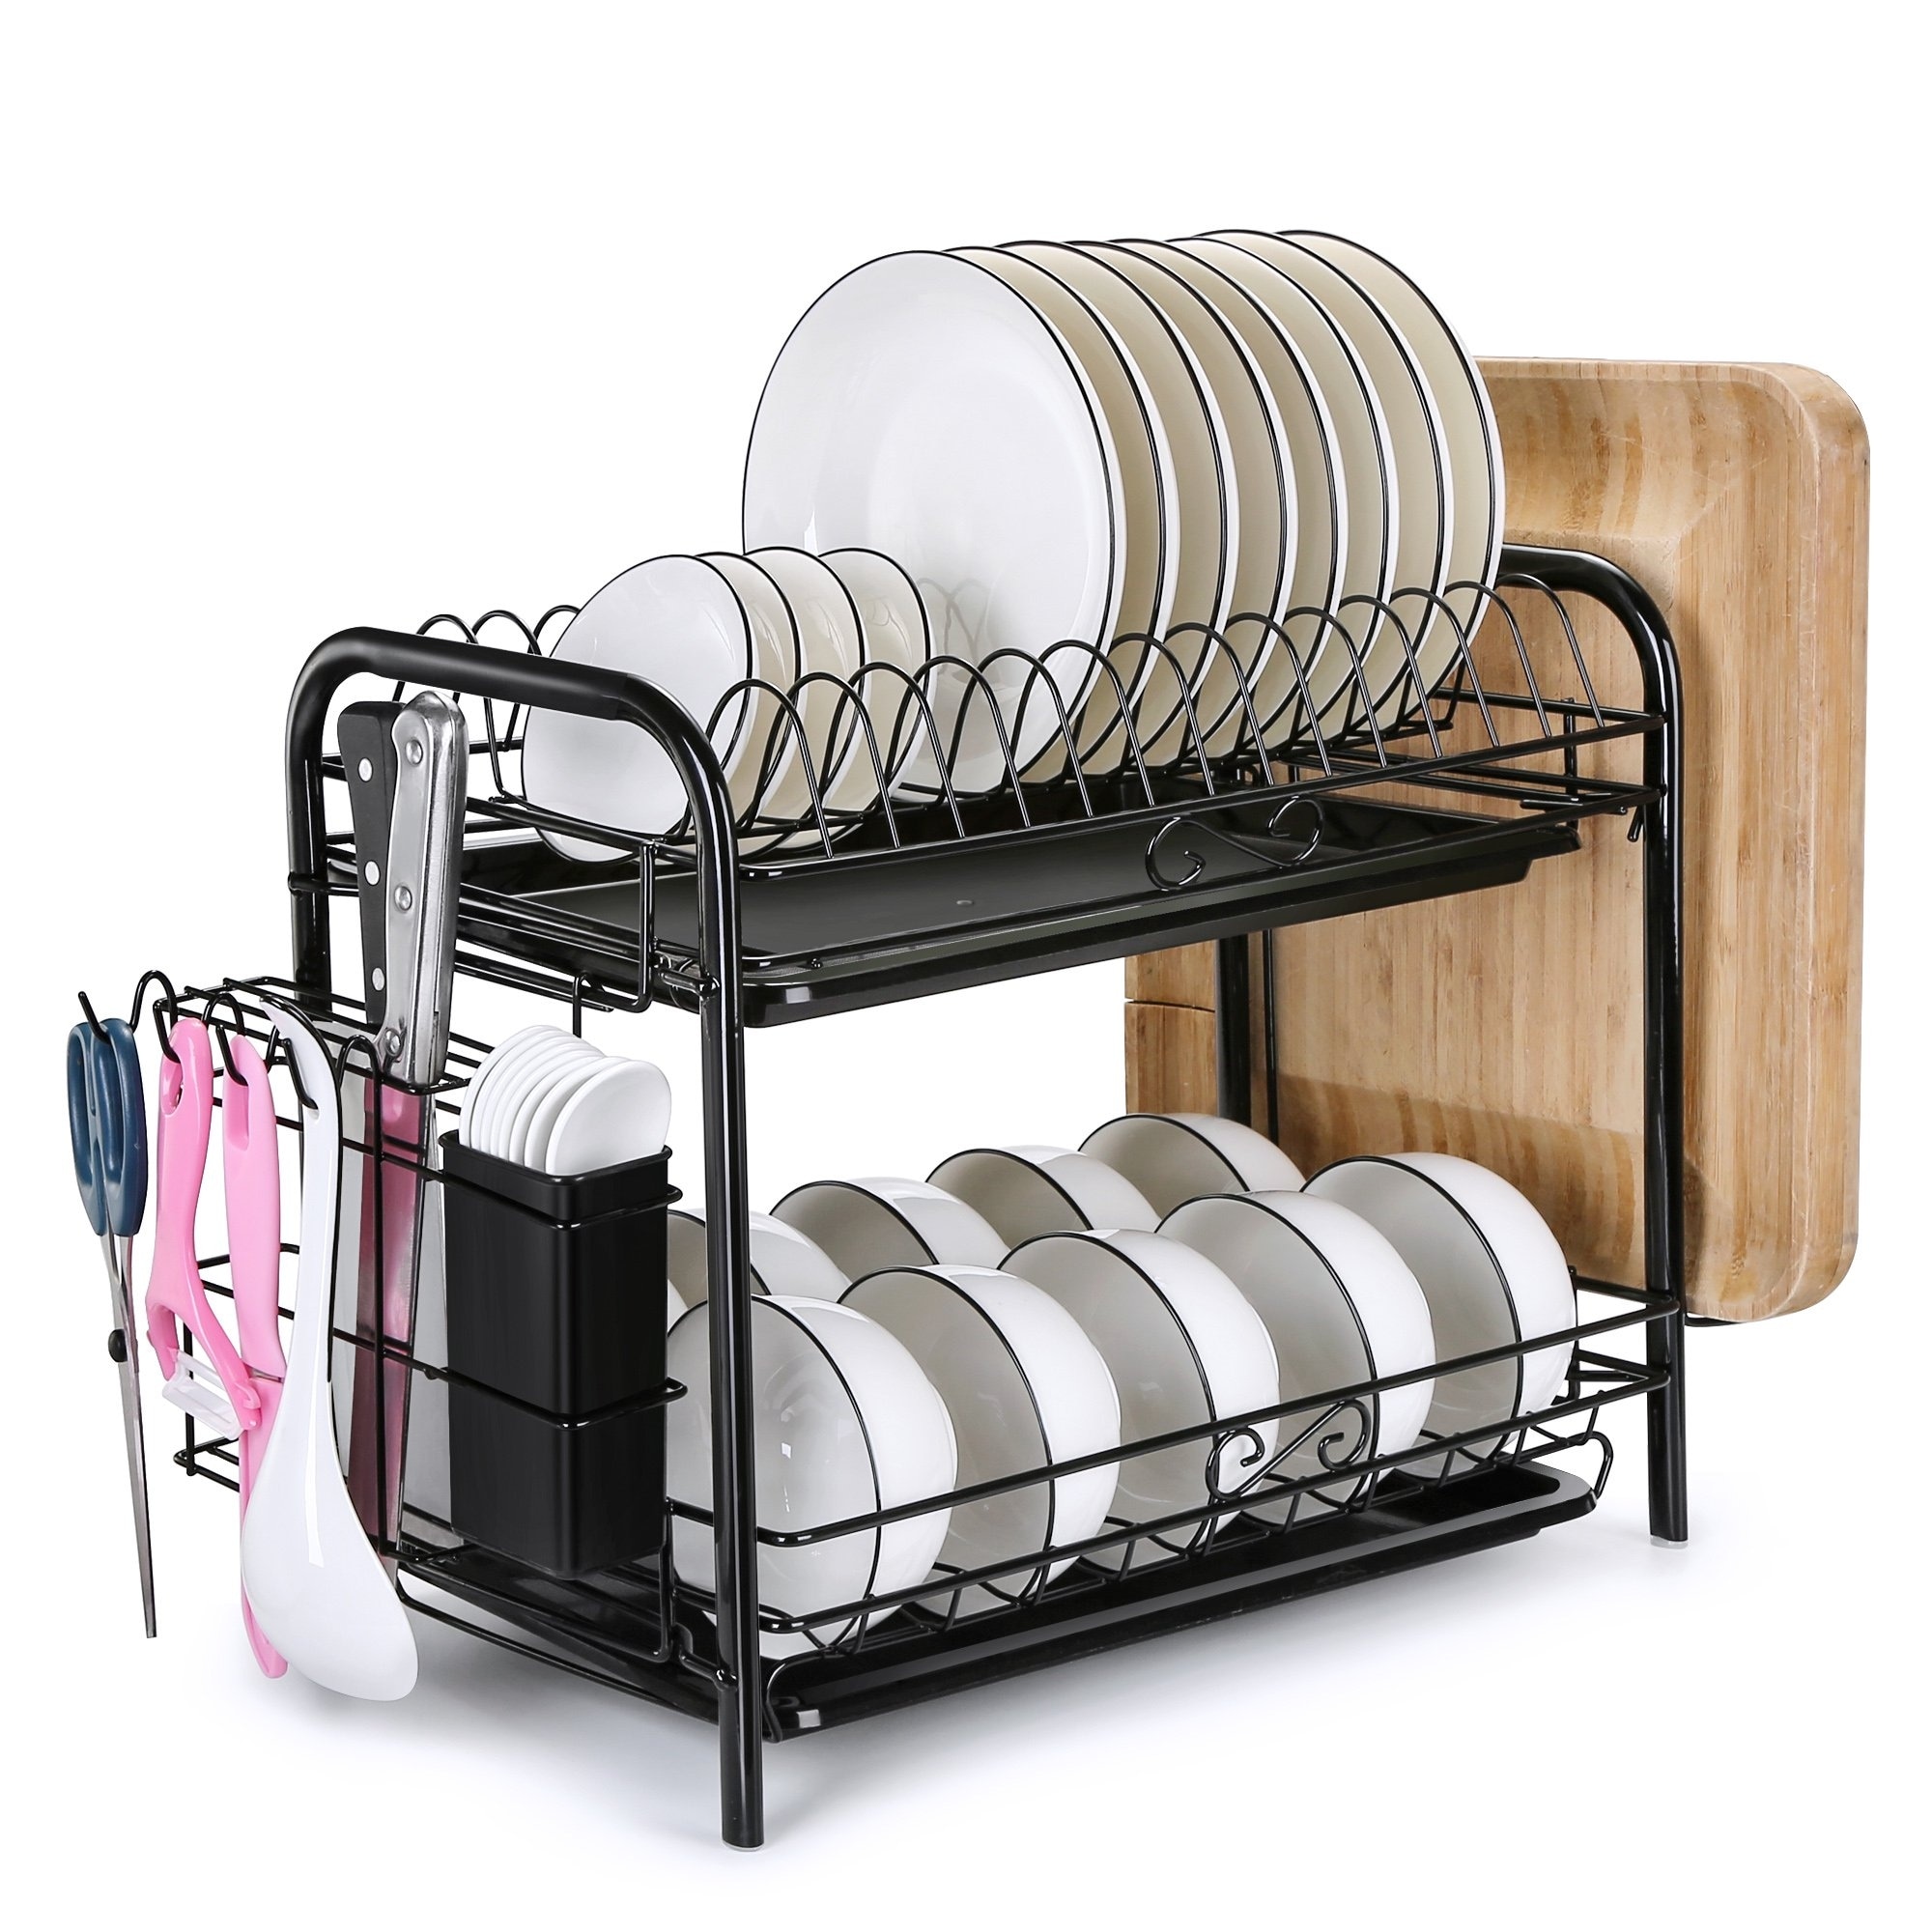 Extendable Dish Rack with Tray and Drainboard, Cup Utensil Holder - Bed  Bath & Beyond - 37482100